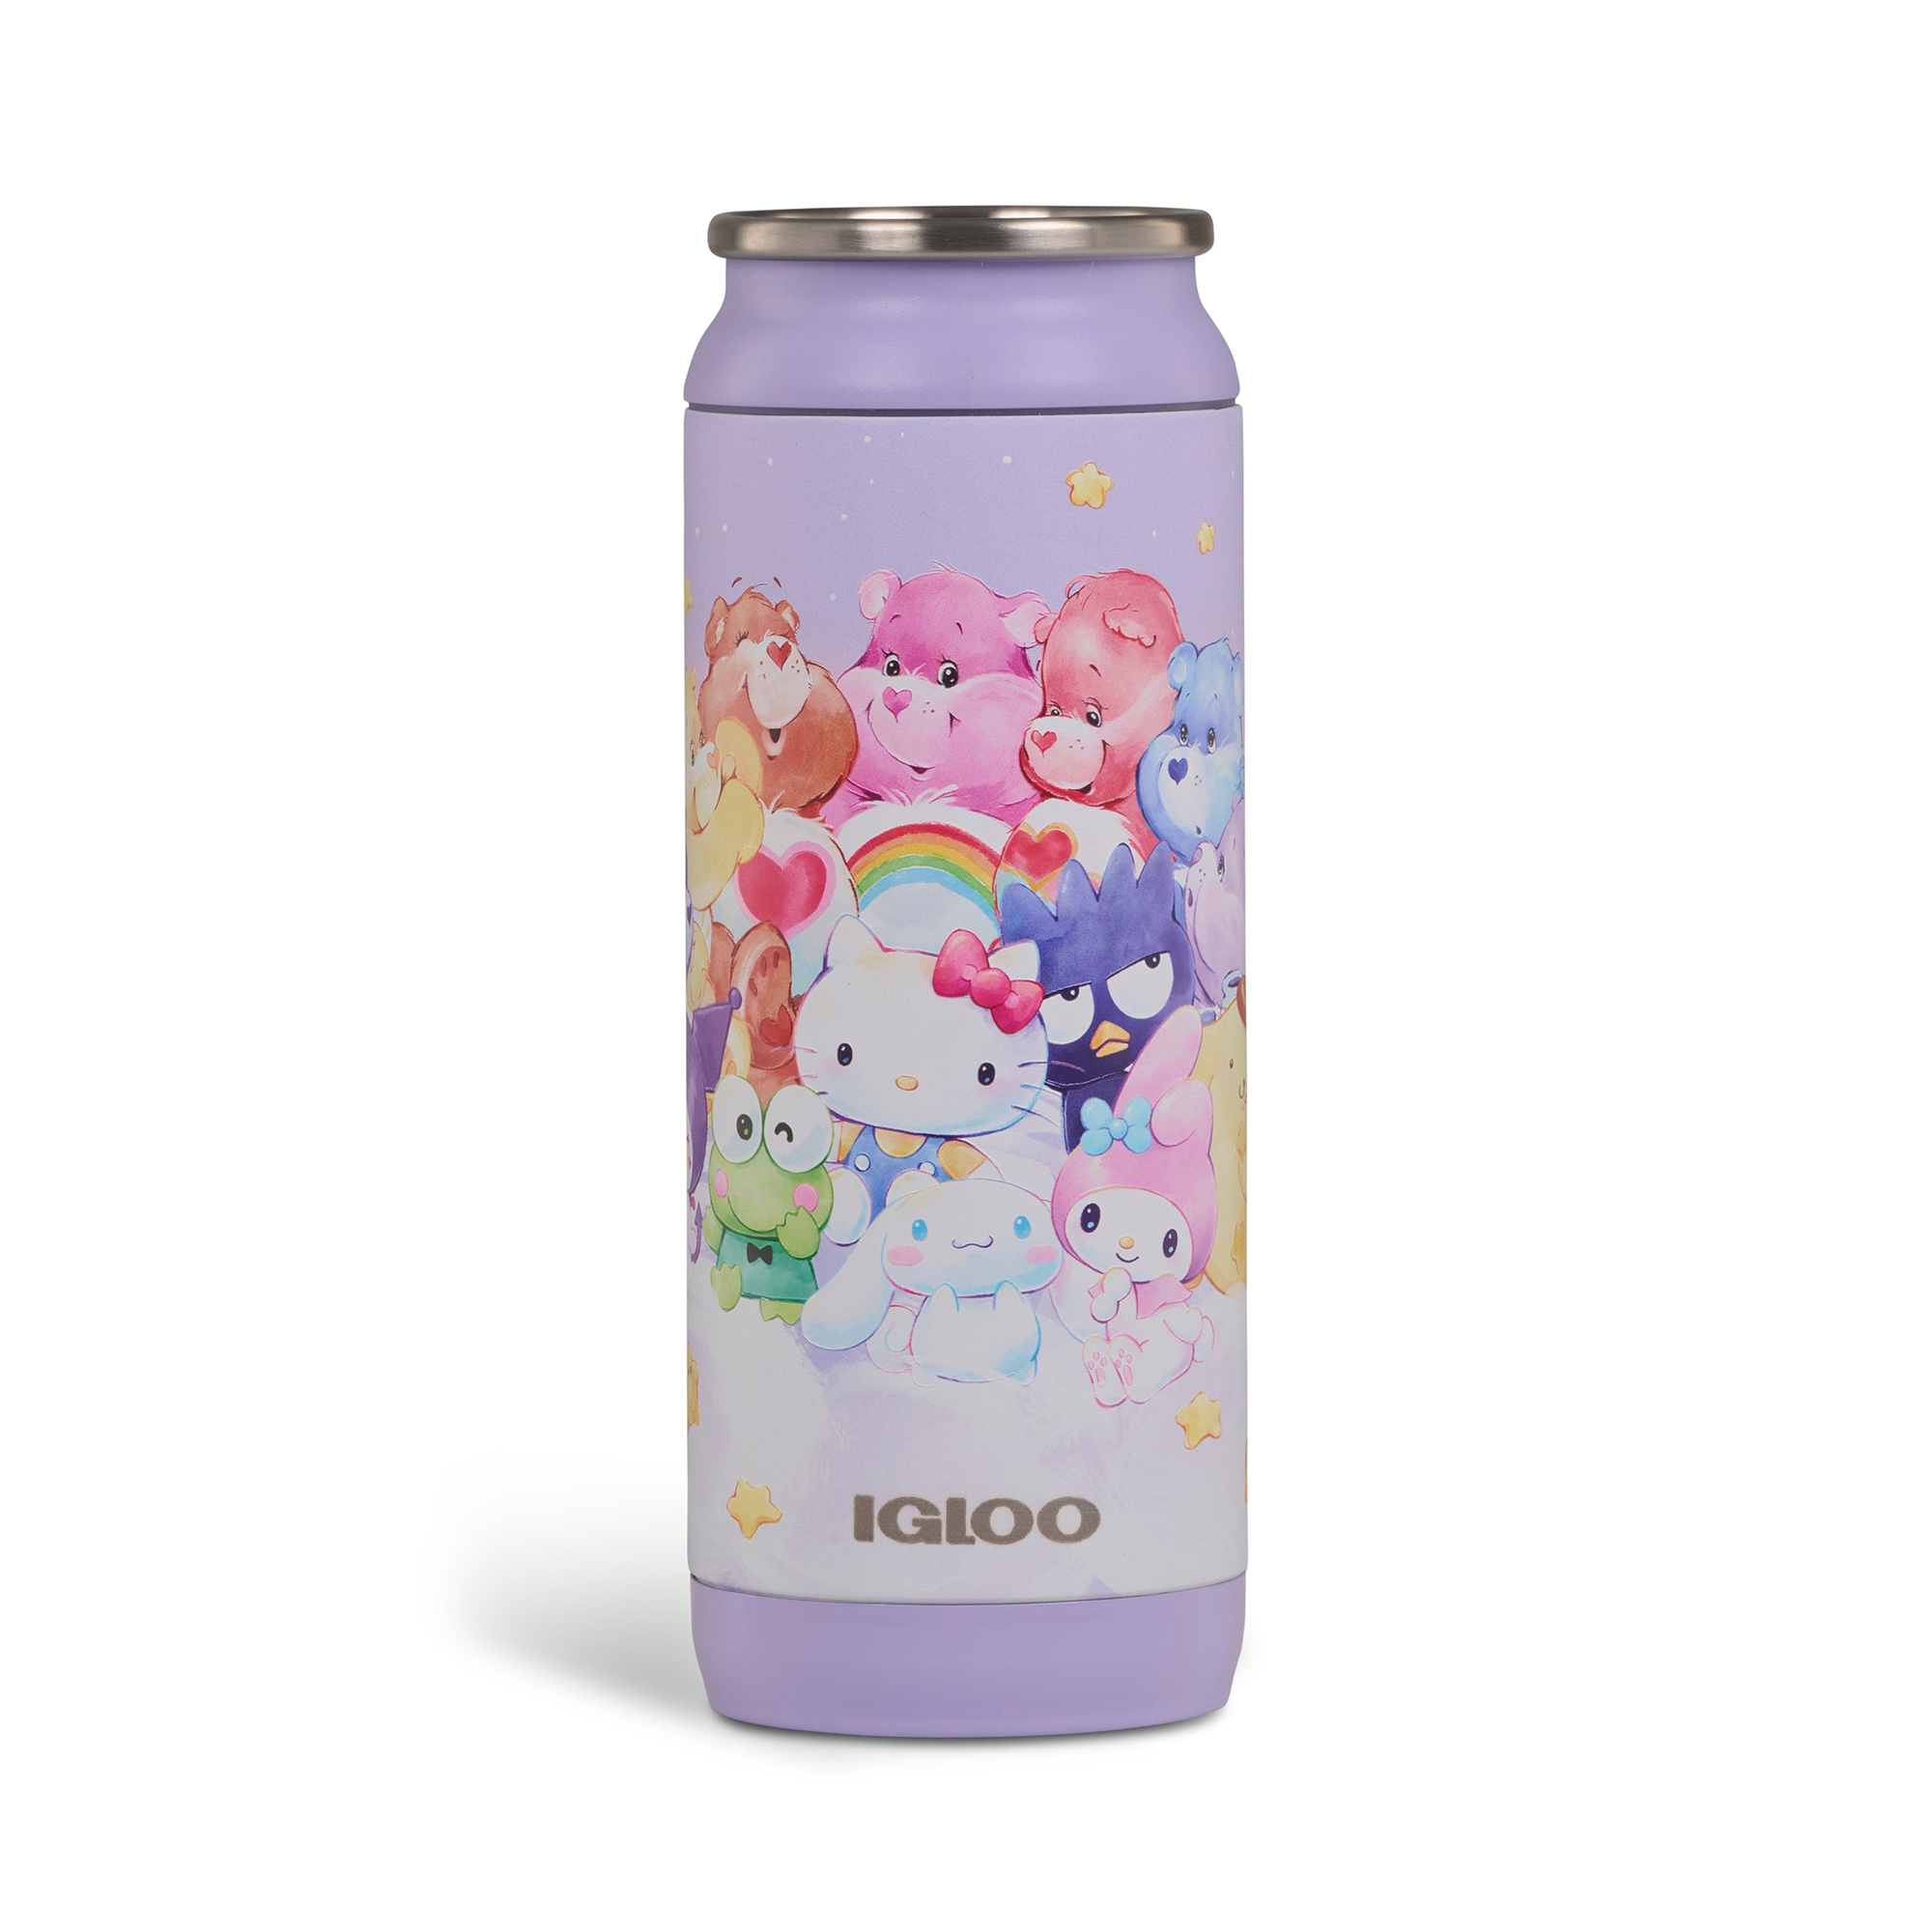 Hello Kitty and Friends x Care Bears Igloo 16 Oz Can Cooler Travel Igloo Products Corp   